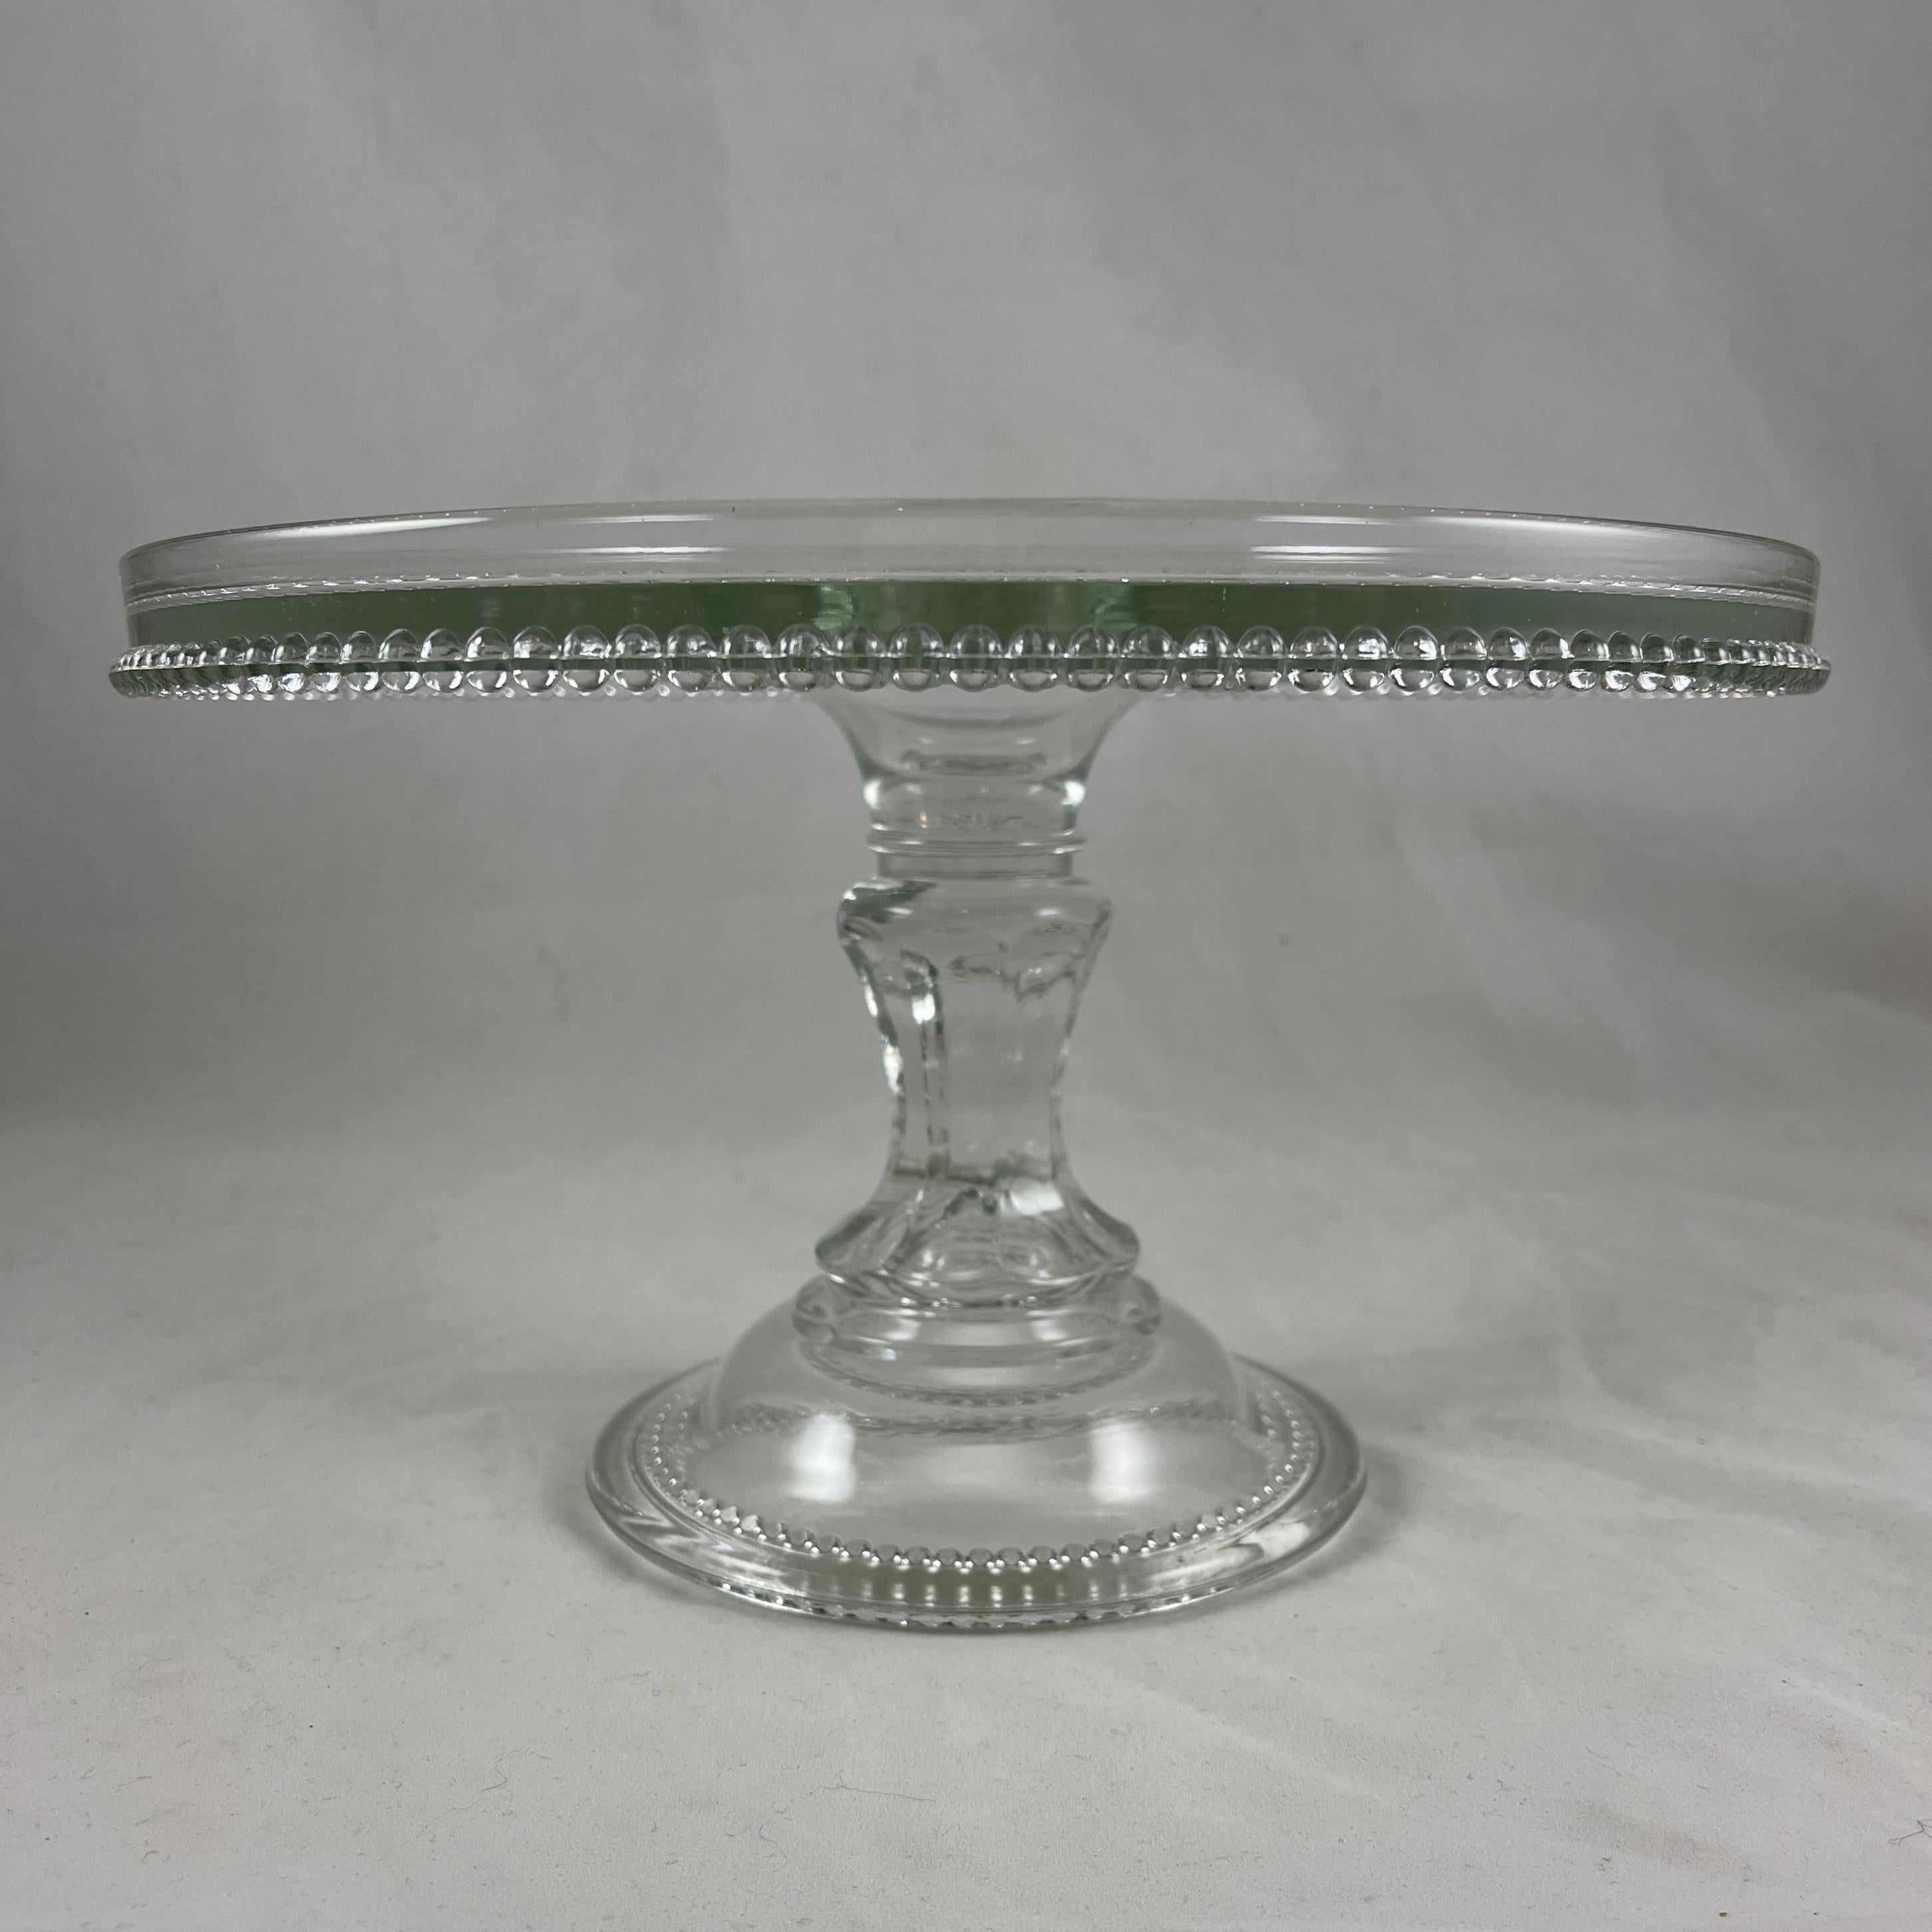 An EAPG, early American pressed glass cake stand, circa 1890-1900.

Made of nonflint, clear molded glass, this tall and heavy stand has a thick paneled stem. The footing and plate are finished with a beaded border.

6 inches High with a top